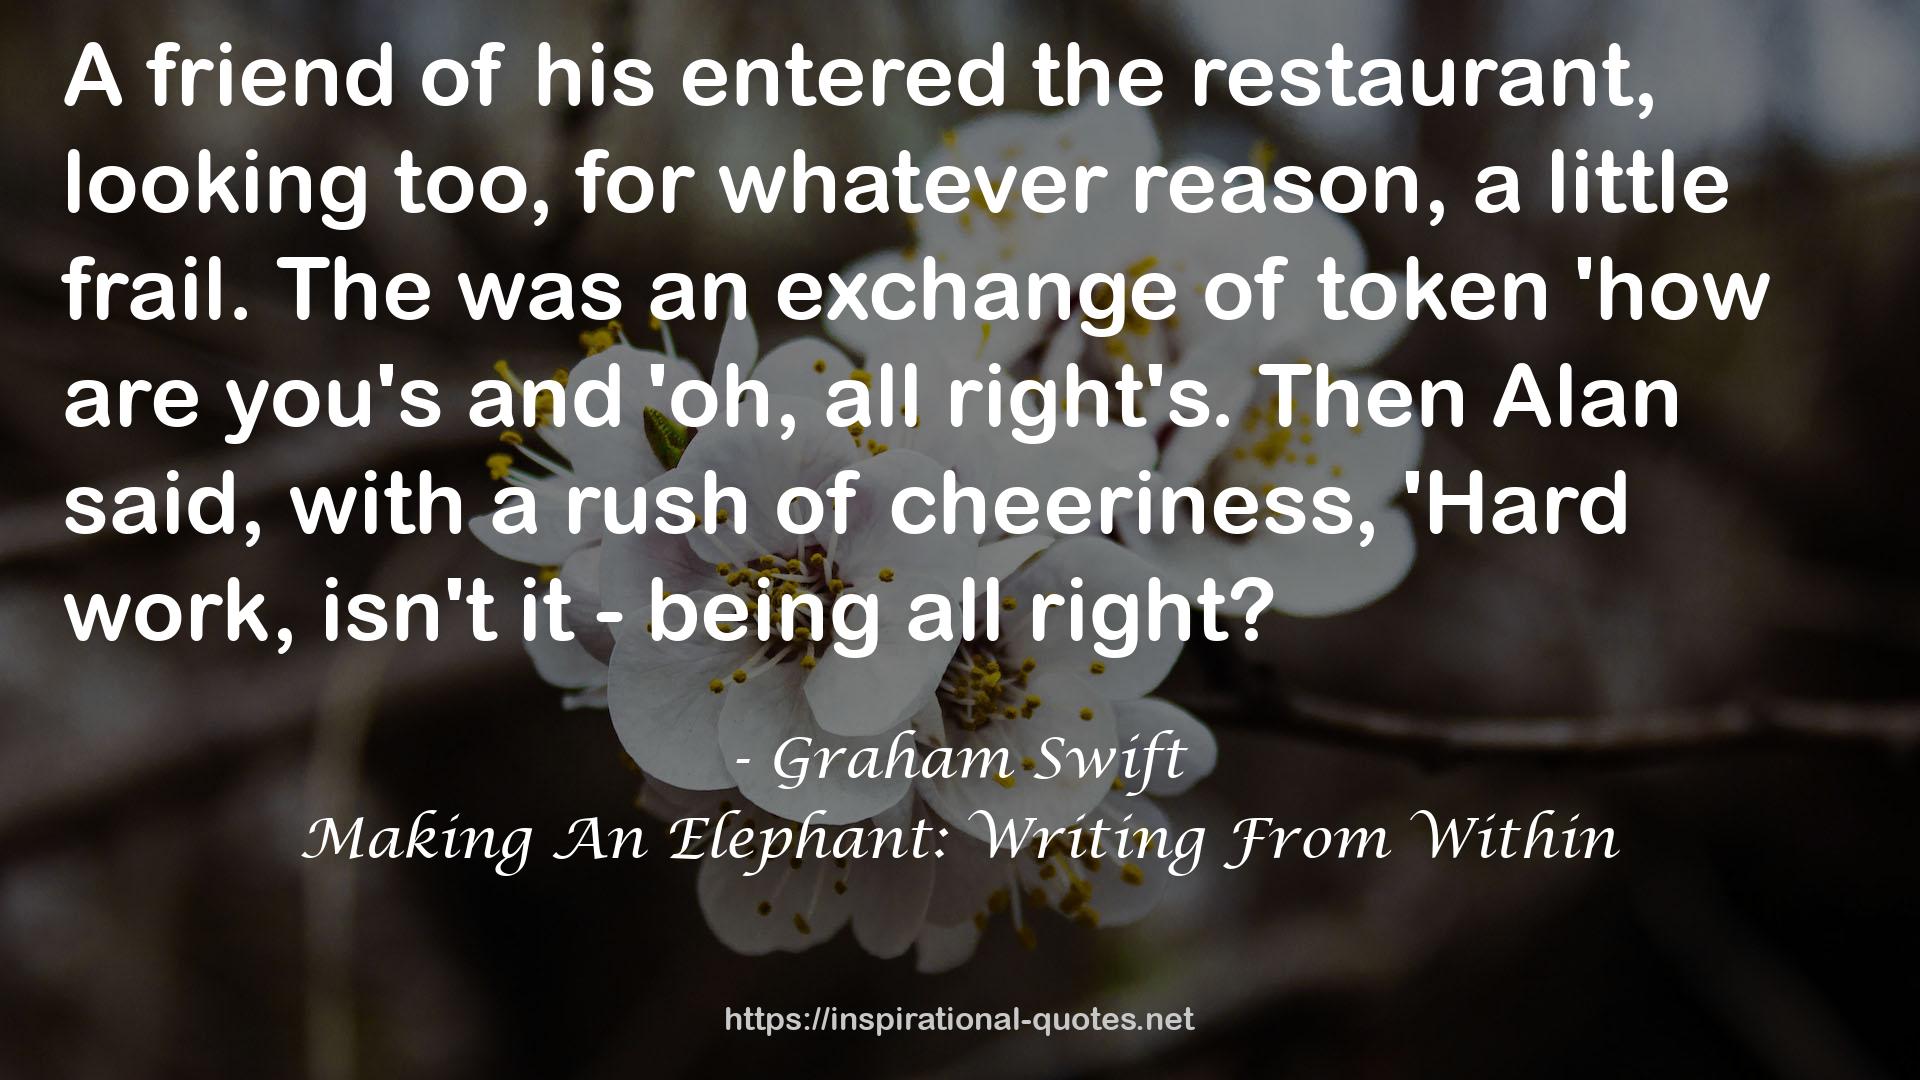 Making An Elephant: Writing From Within QUOTES